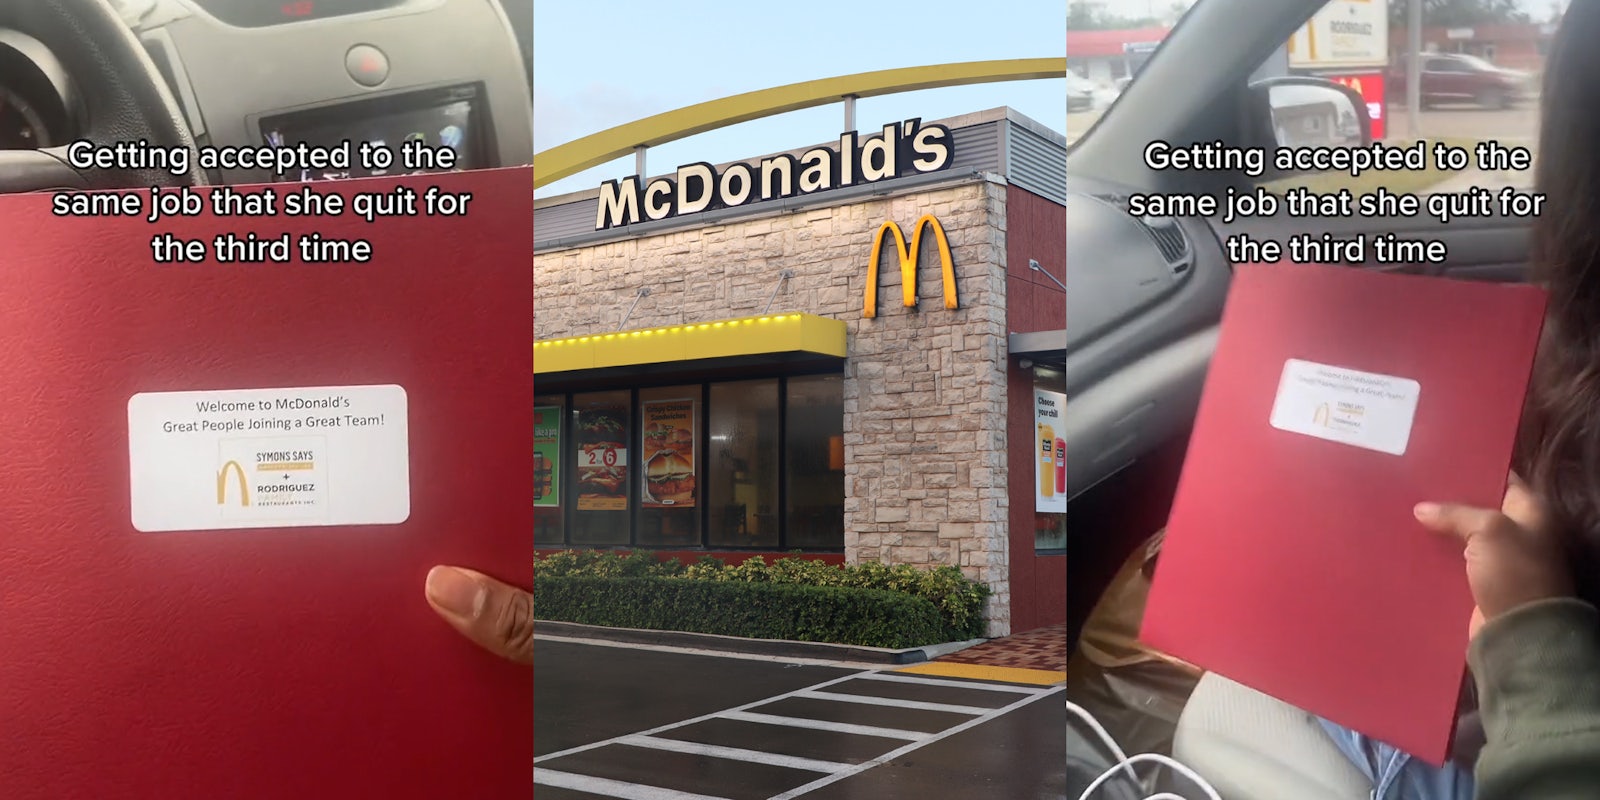 person holding McDonald's folder in car caption 'Getting accepted to the same job she quit for the third time' (l) McDonald's signs on building (c) person holding McDonald's folder up to passenger in car caption 'Getting accepted to the same job that she quit for the third time' (r)